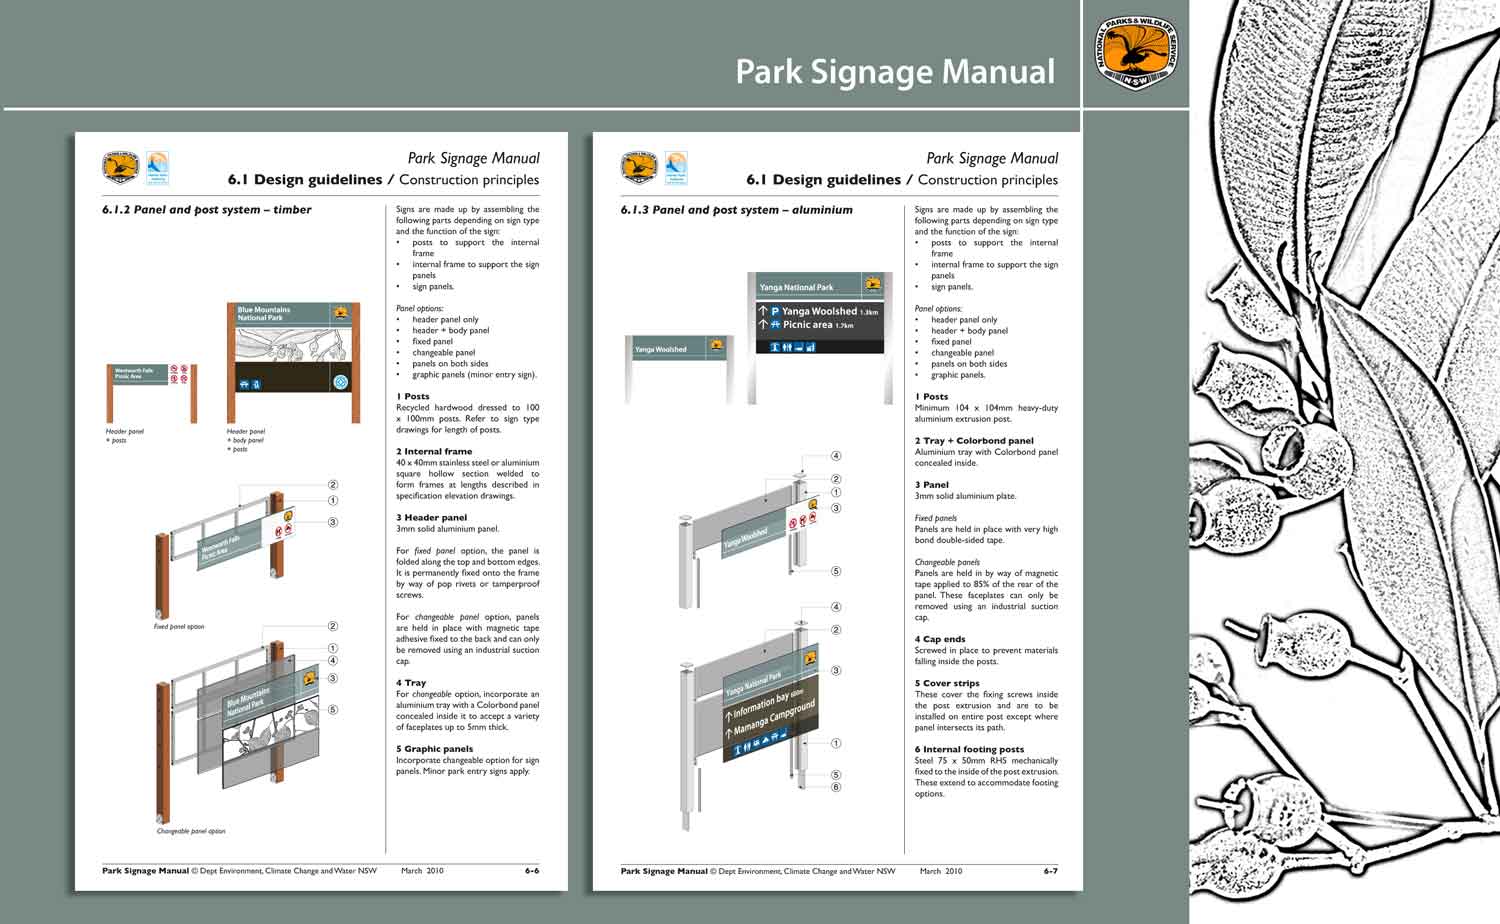 Sign Manual construction specifications.jpg